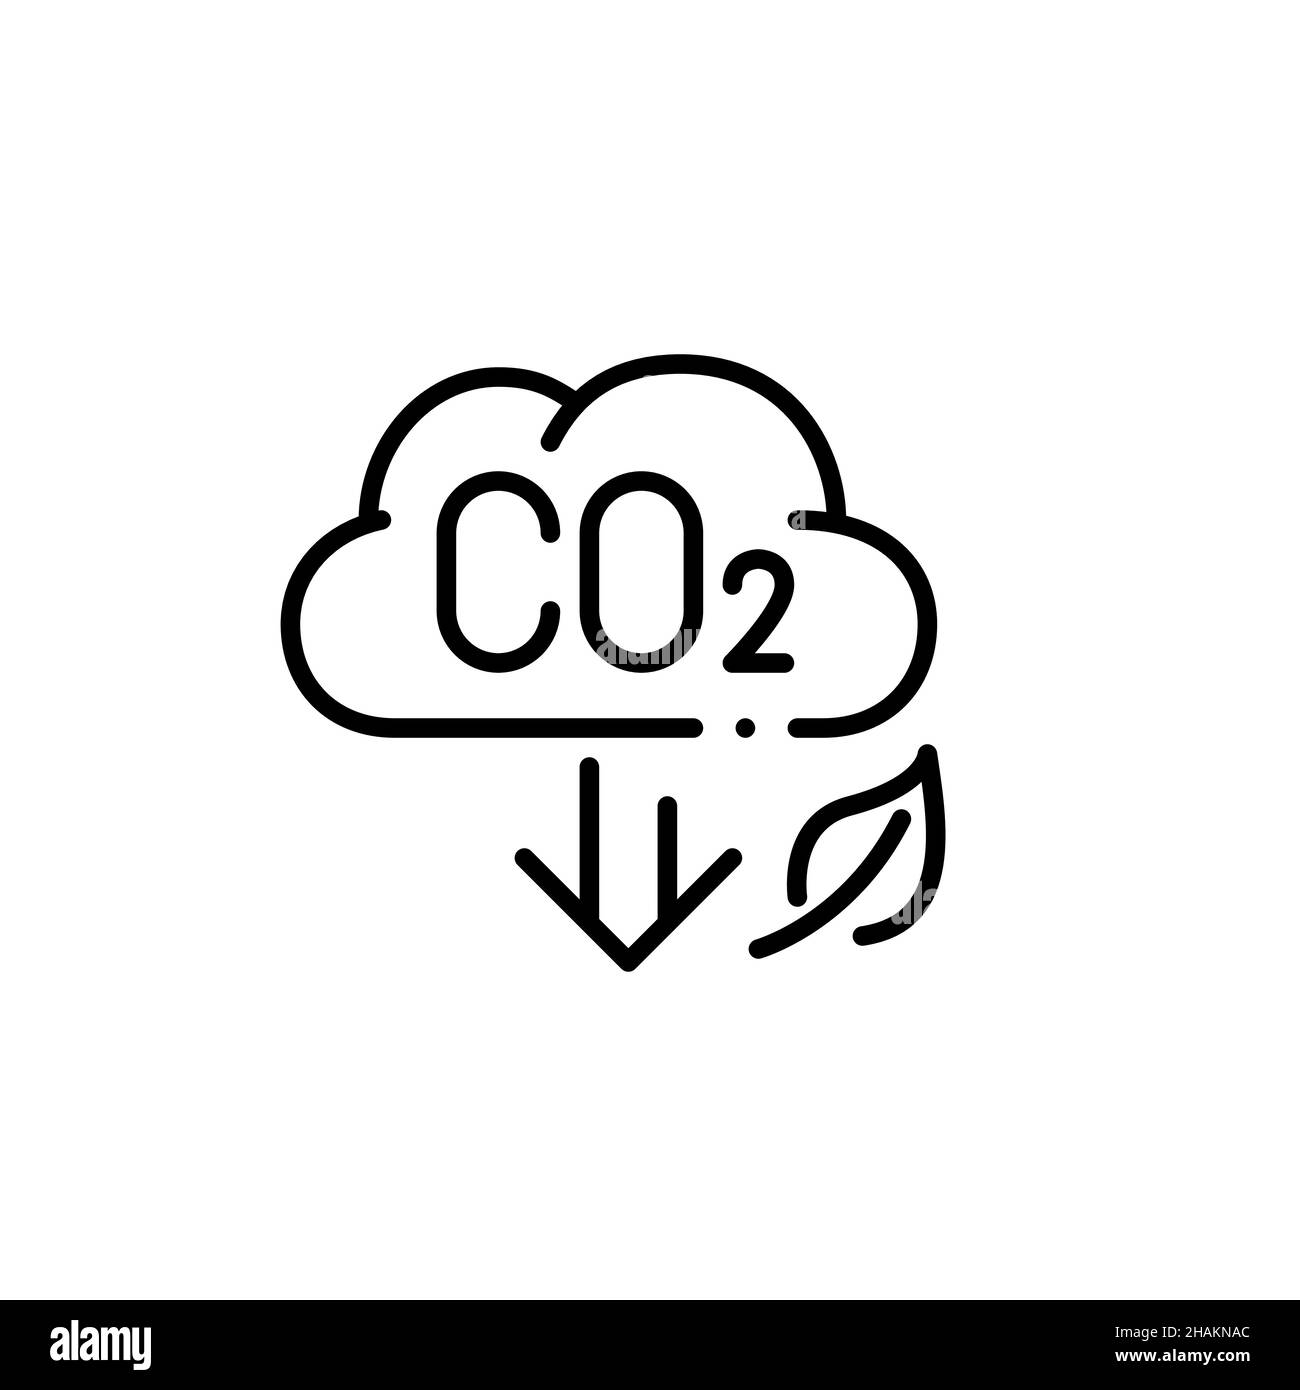 Carbon dioxide emission reduction. Pixel perfect, editable stroke icon Stock Vector